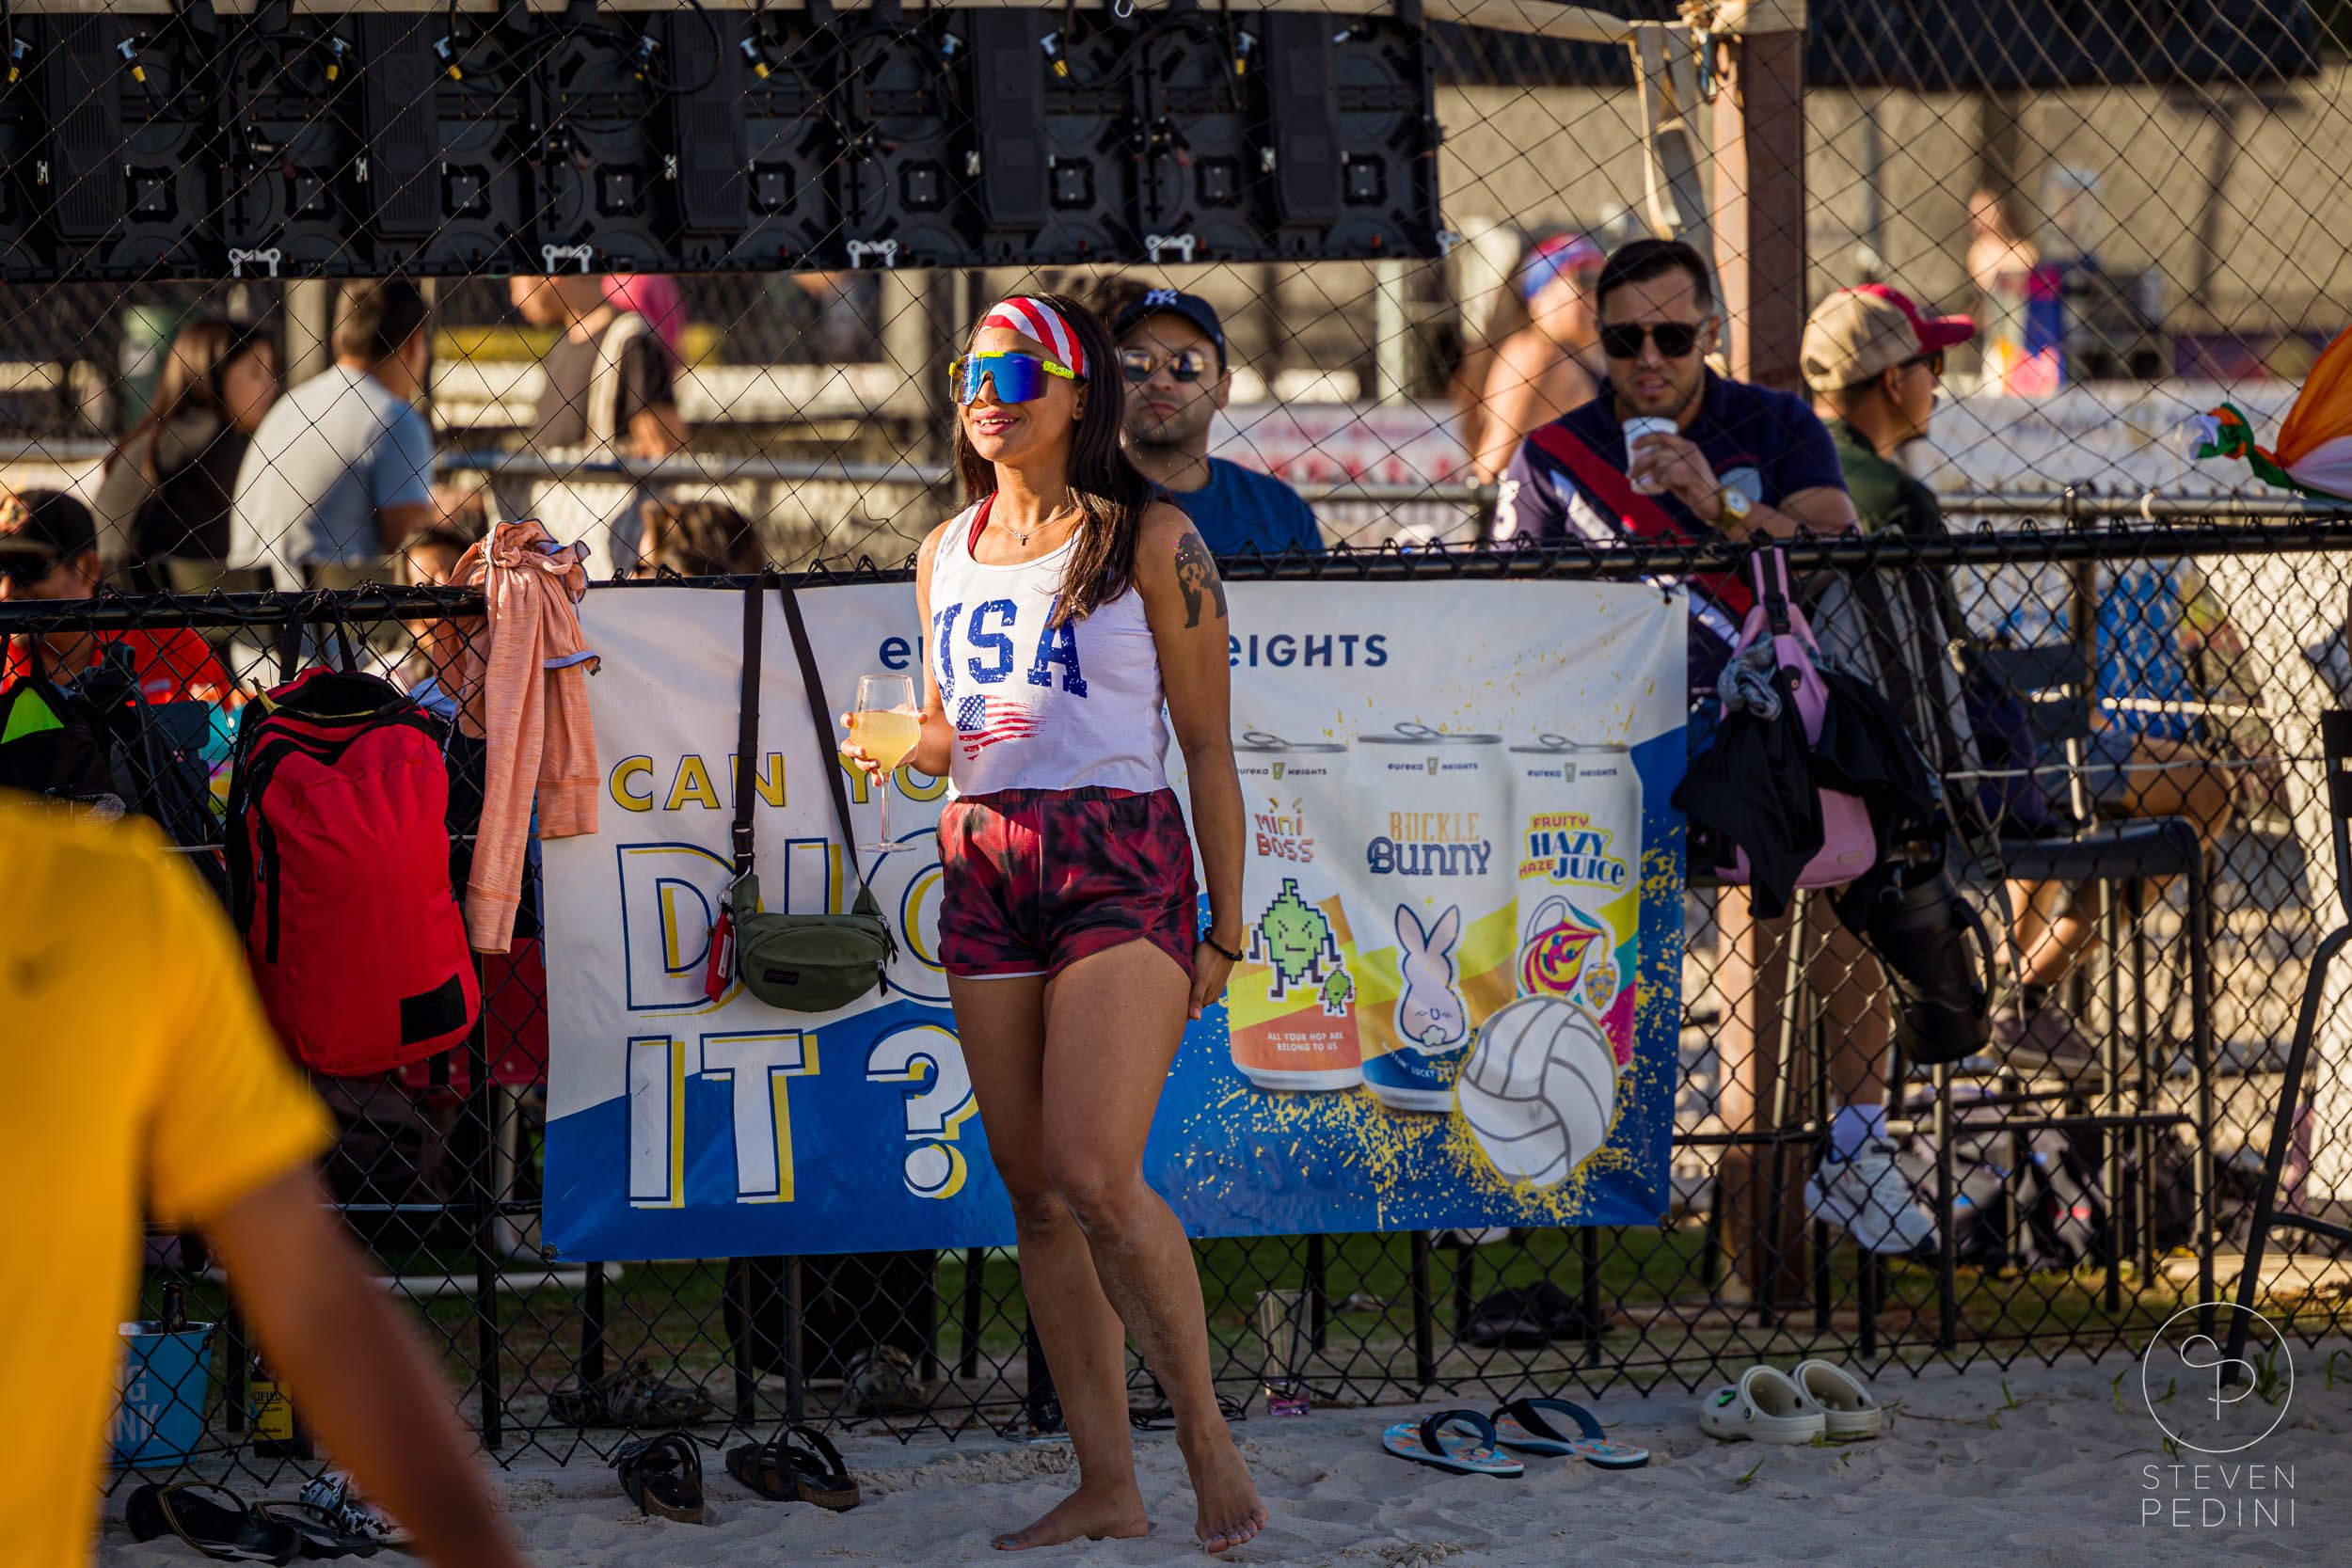 Steven Pedini Photography - Bumpy Pickle - Sand Volleyball - Houston TX - World Cup of Volleyball - 00054.jpg